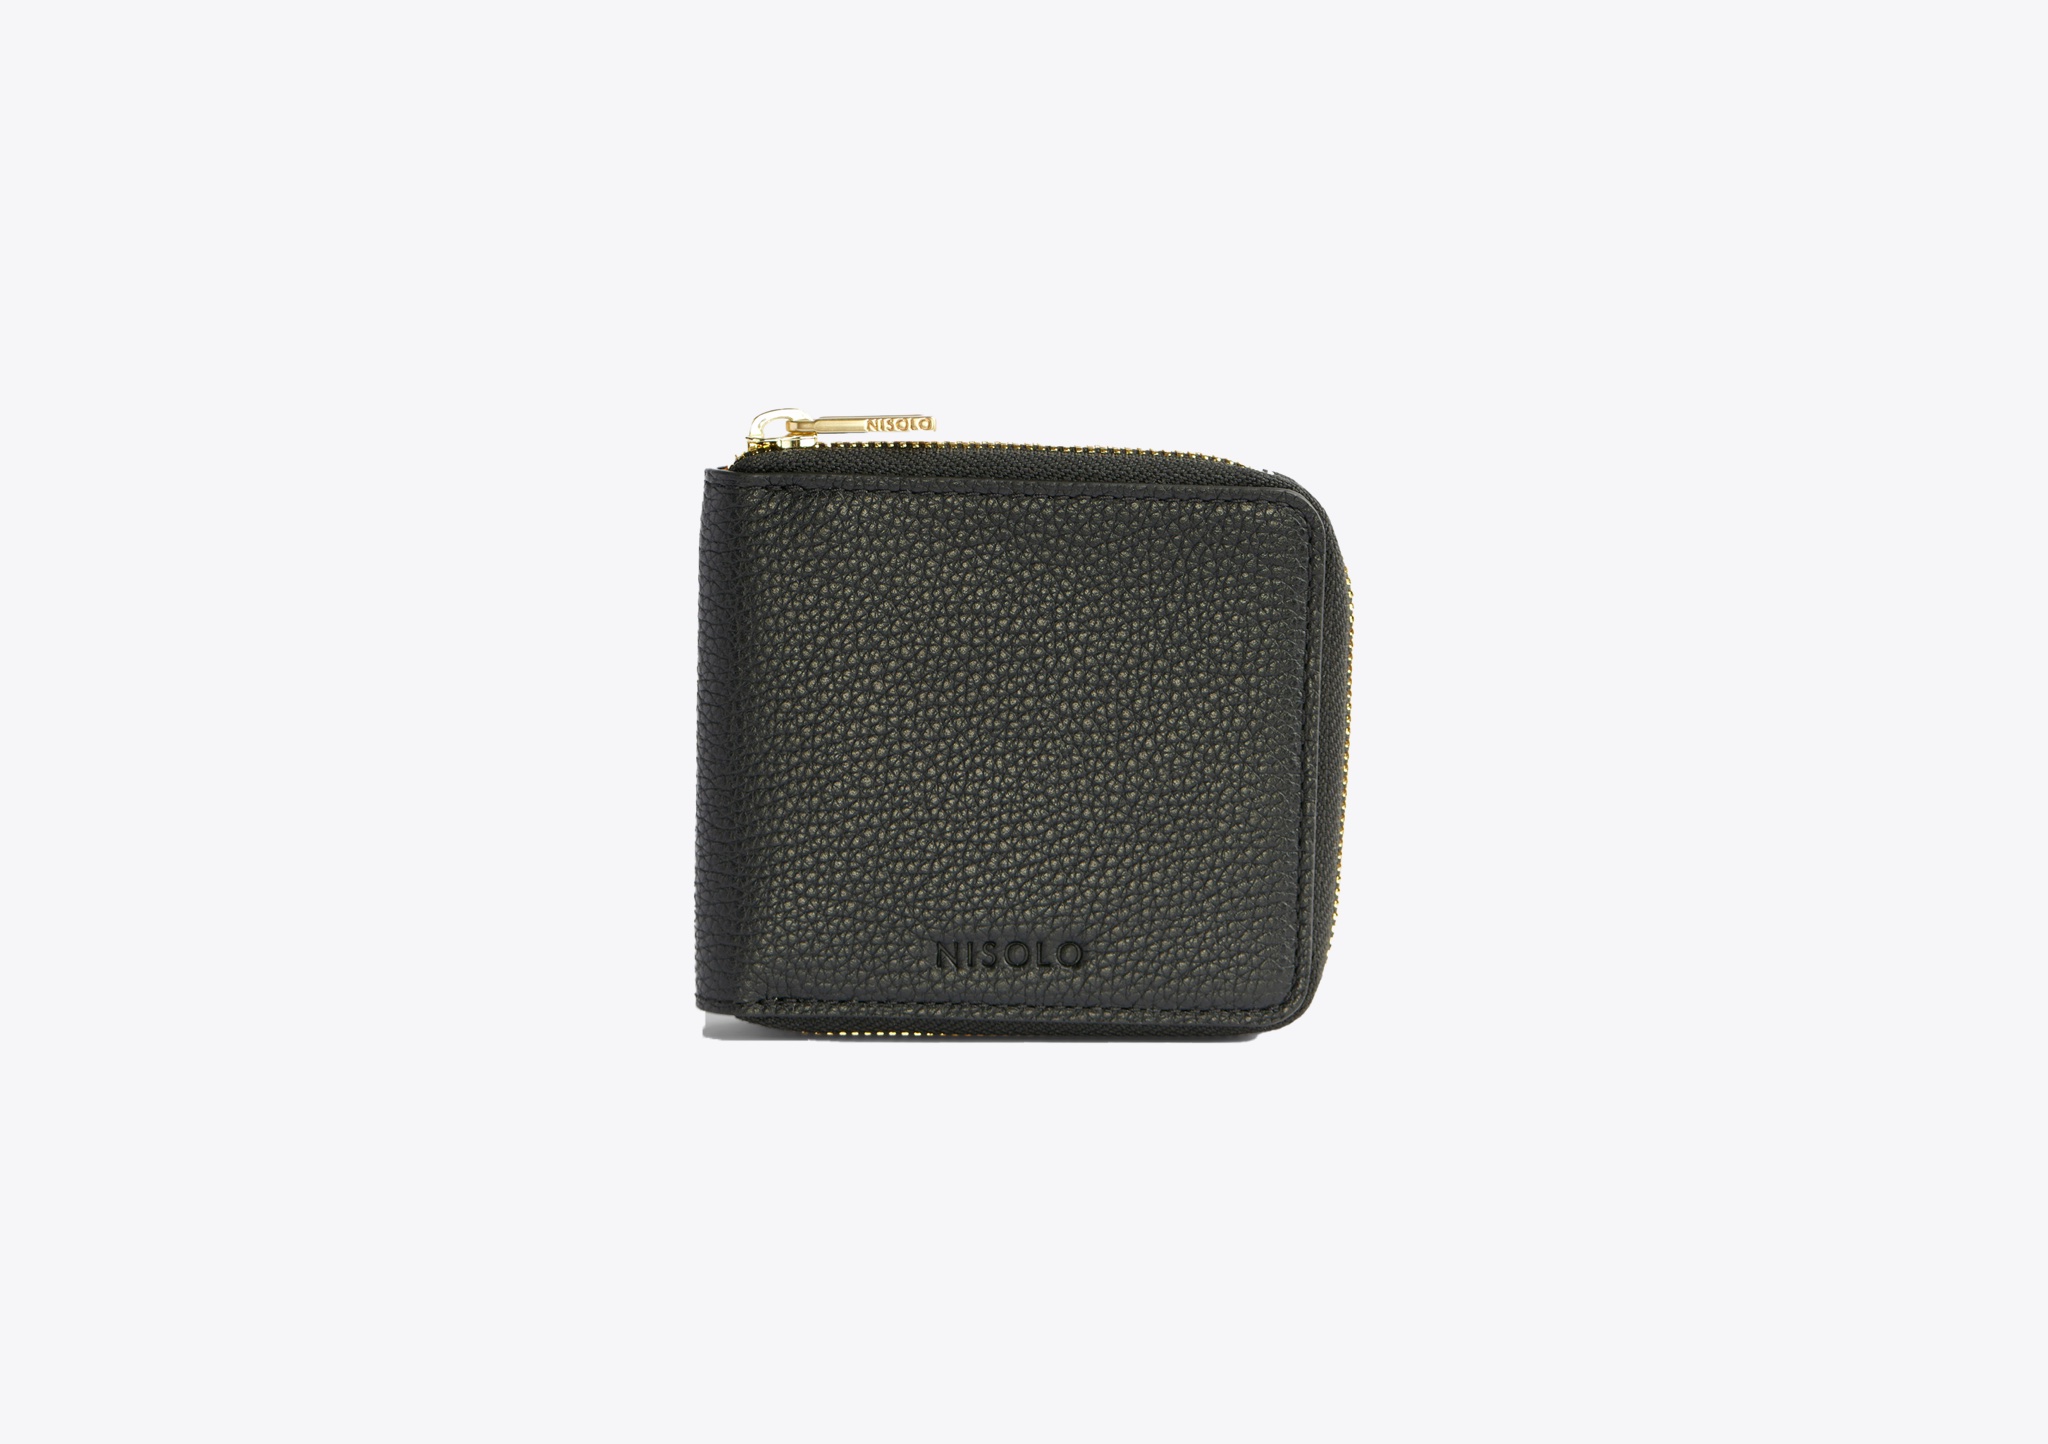 Nisolo Remi Zip Wallet Black - Every Nisolo product is built on the foundation of comfort, function, and design. 